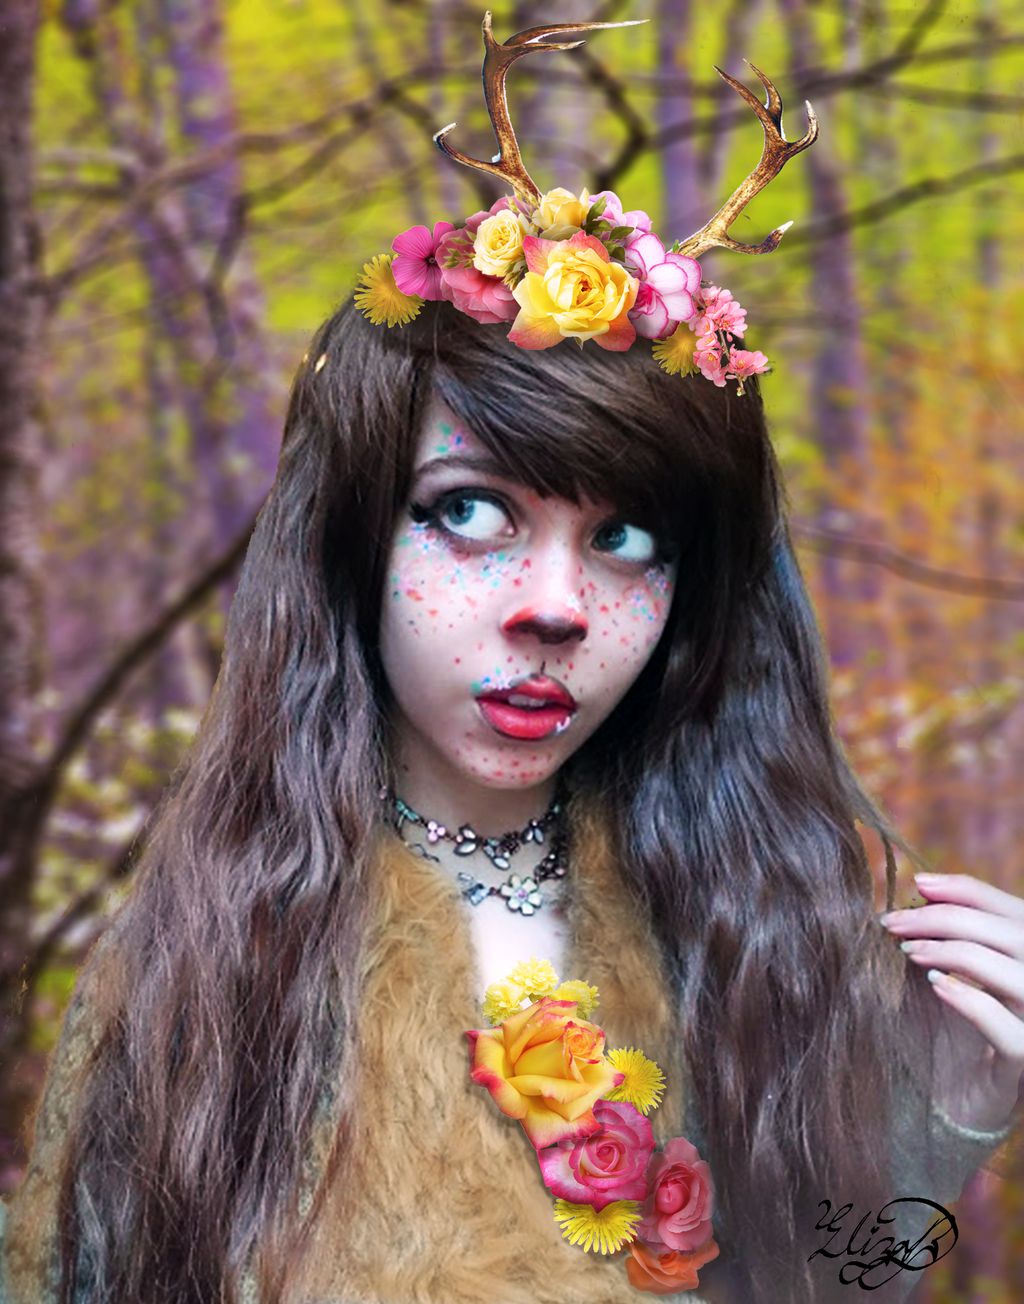 Princess Of Fawns by Enchanted-Eliza-Rose on DeviantArt